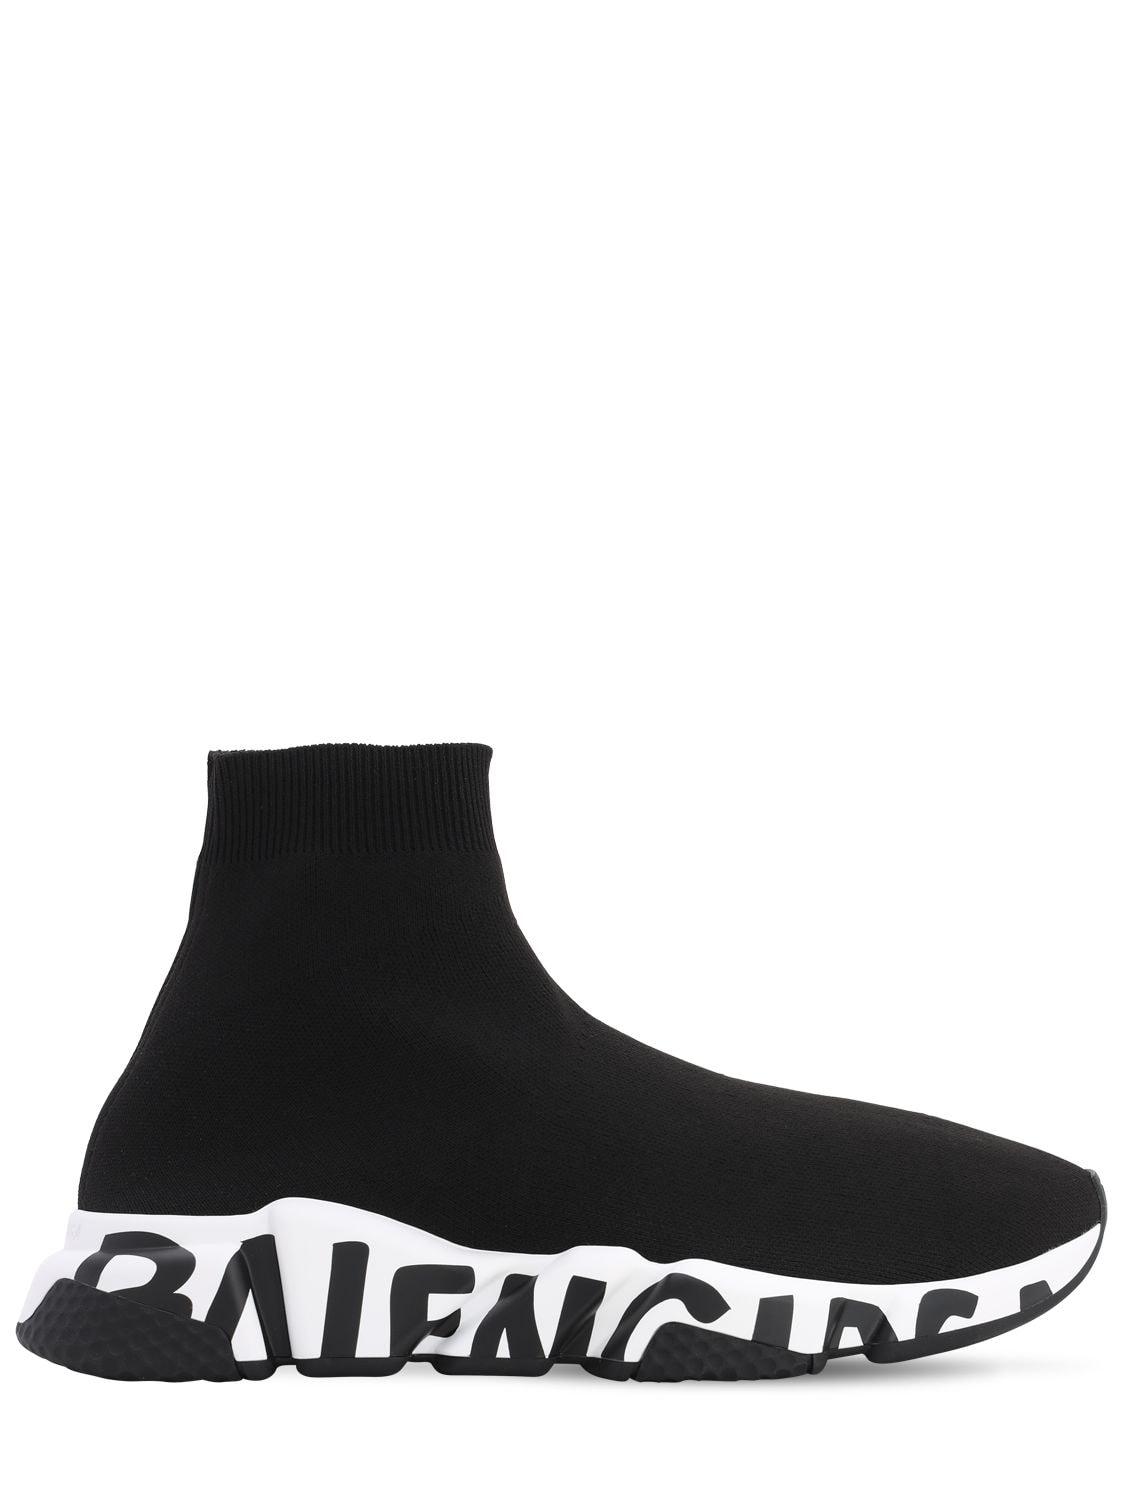 White And Black Balenciaga Shoes Store, SAVE 54% - aveclumiere.com